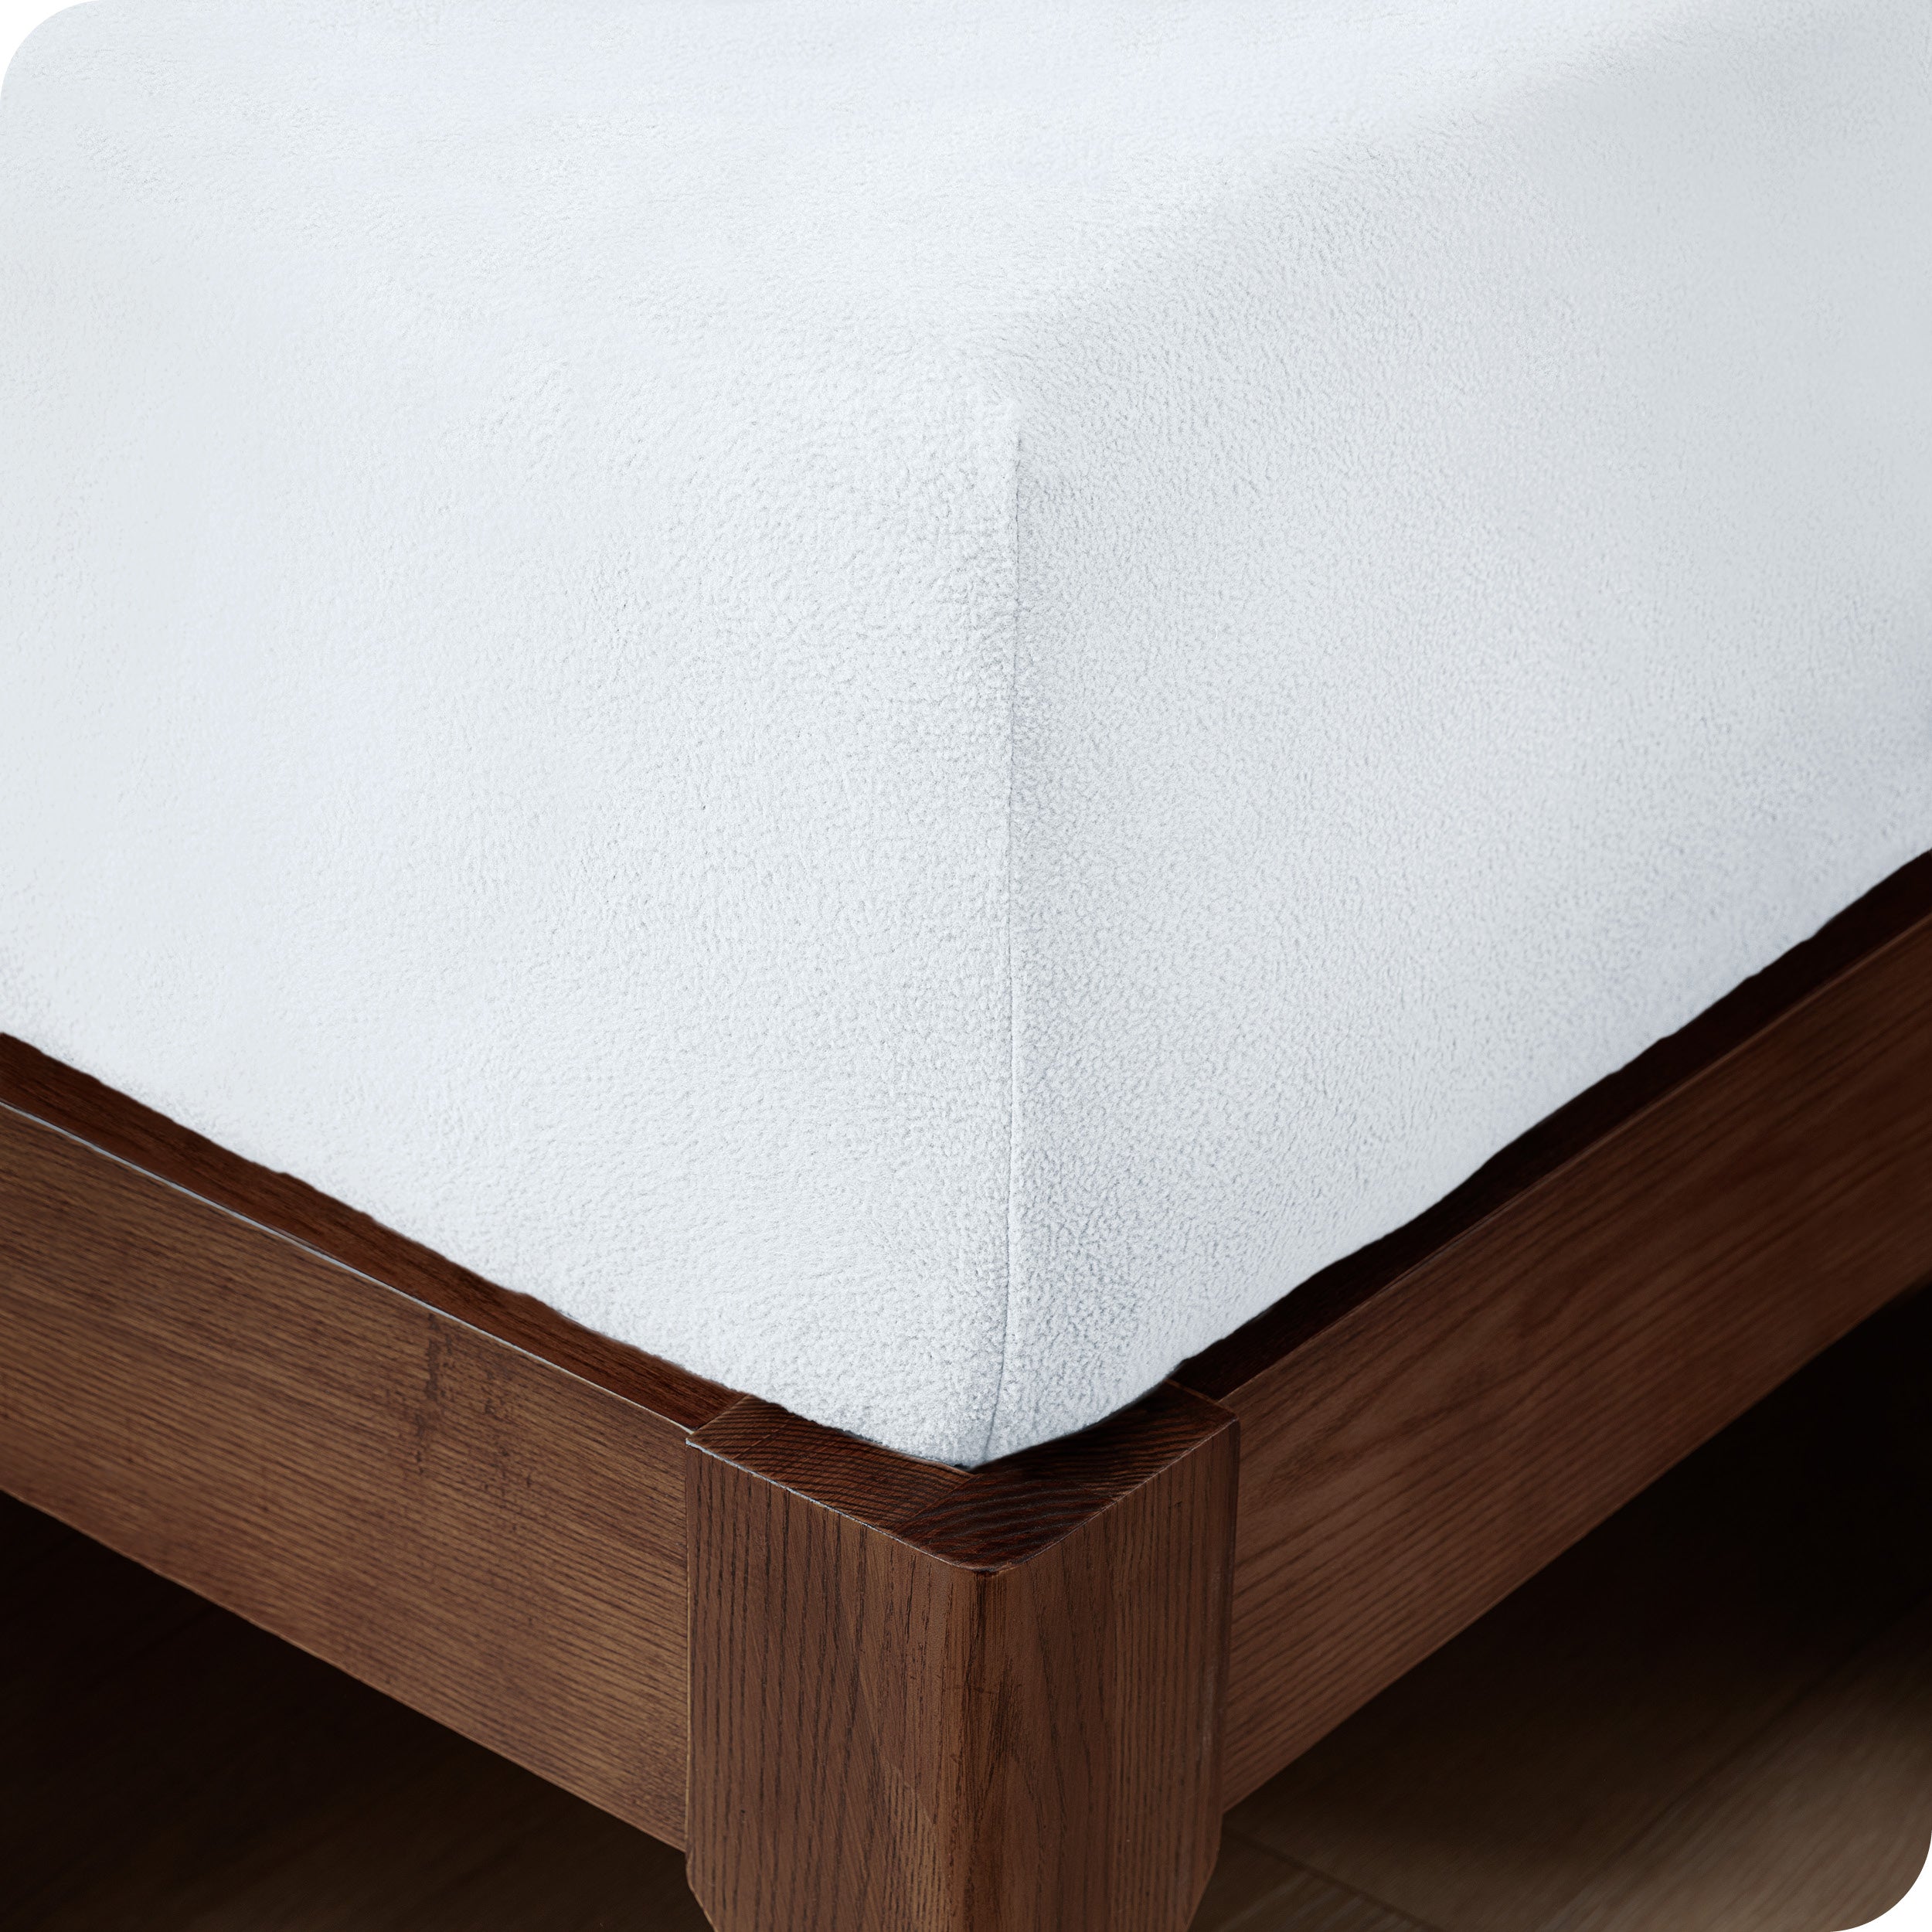 A corner of a modern bed with a polar fleece fitted sheet on.